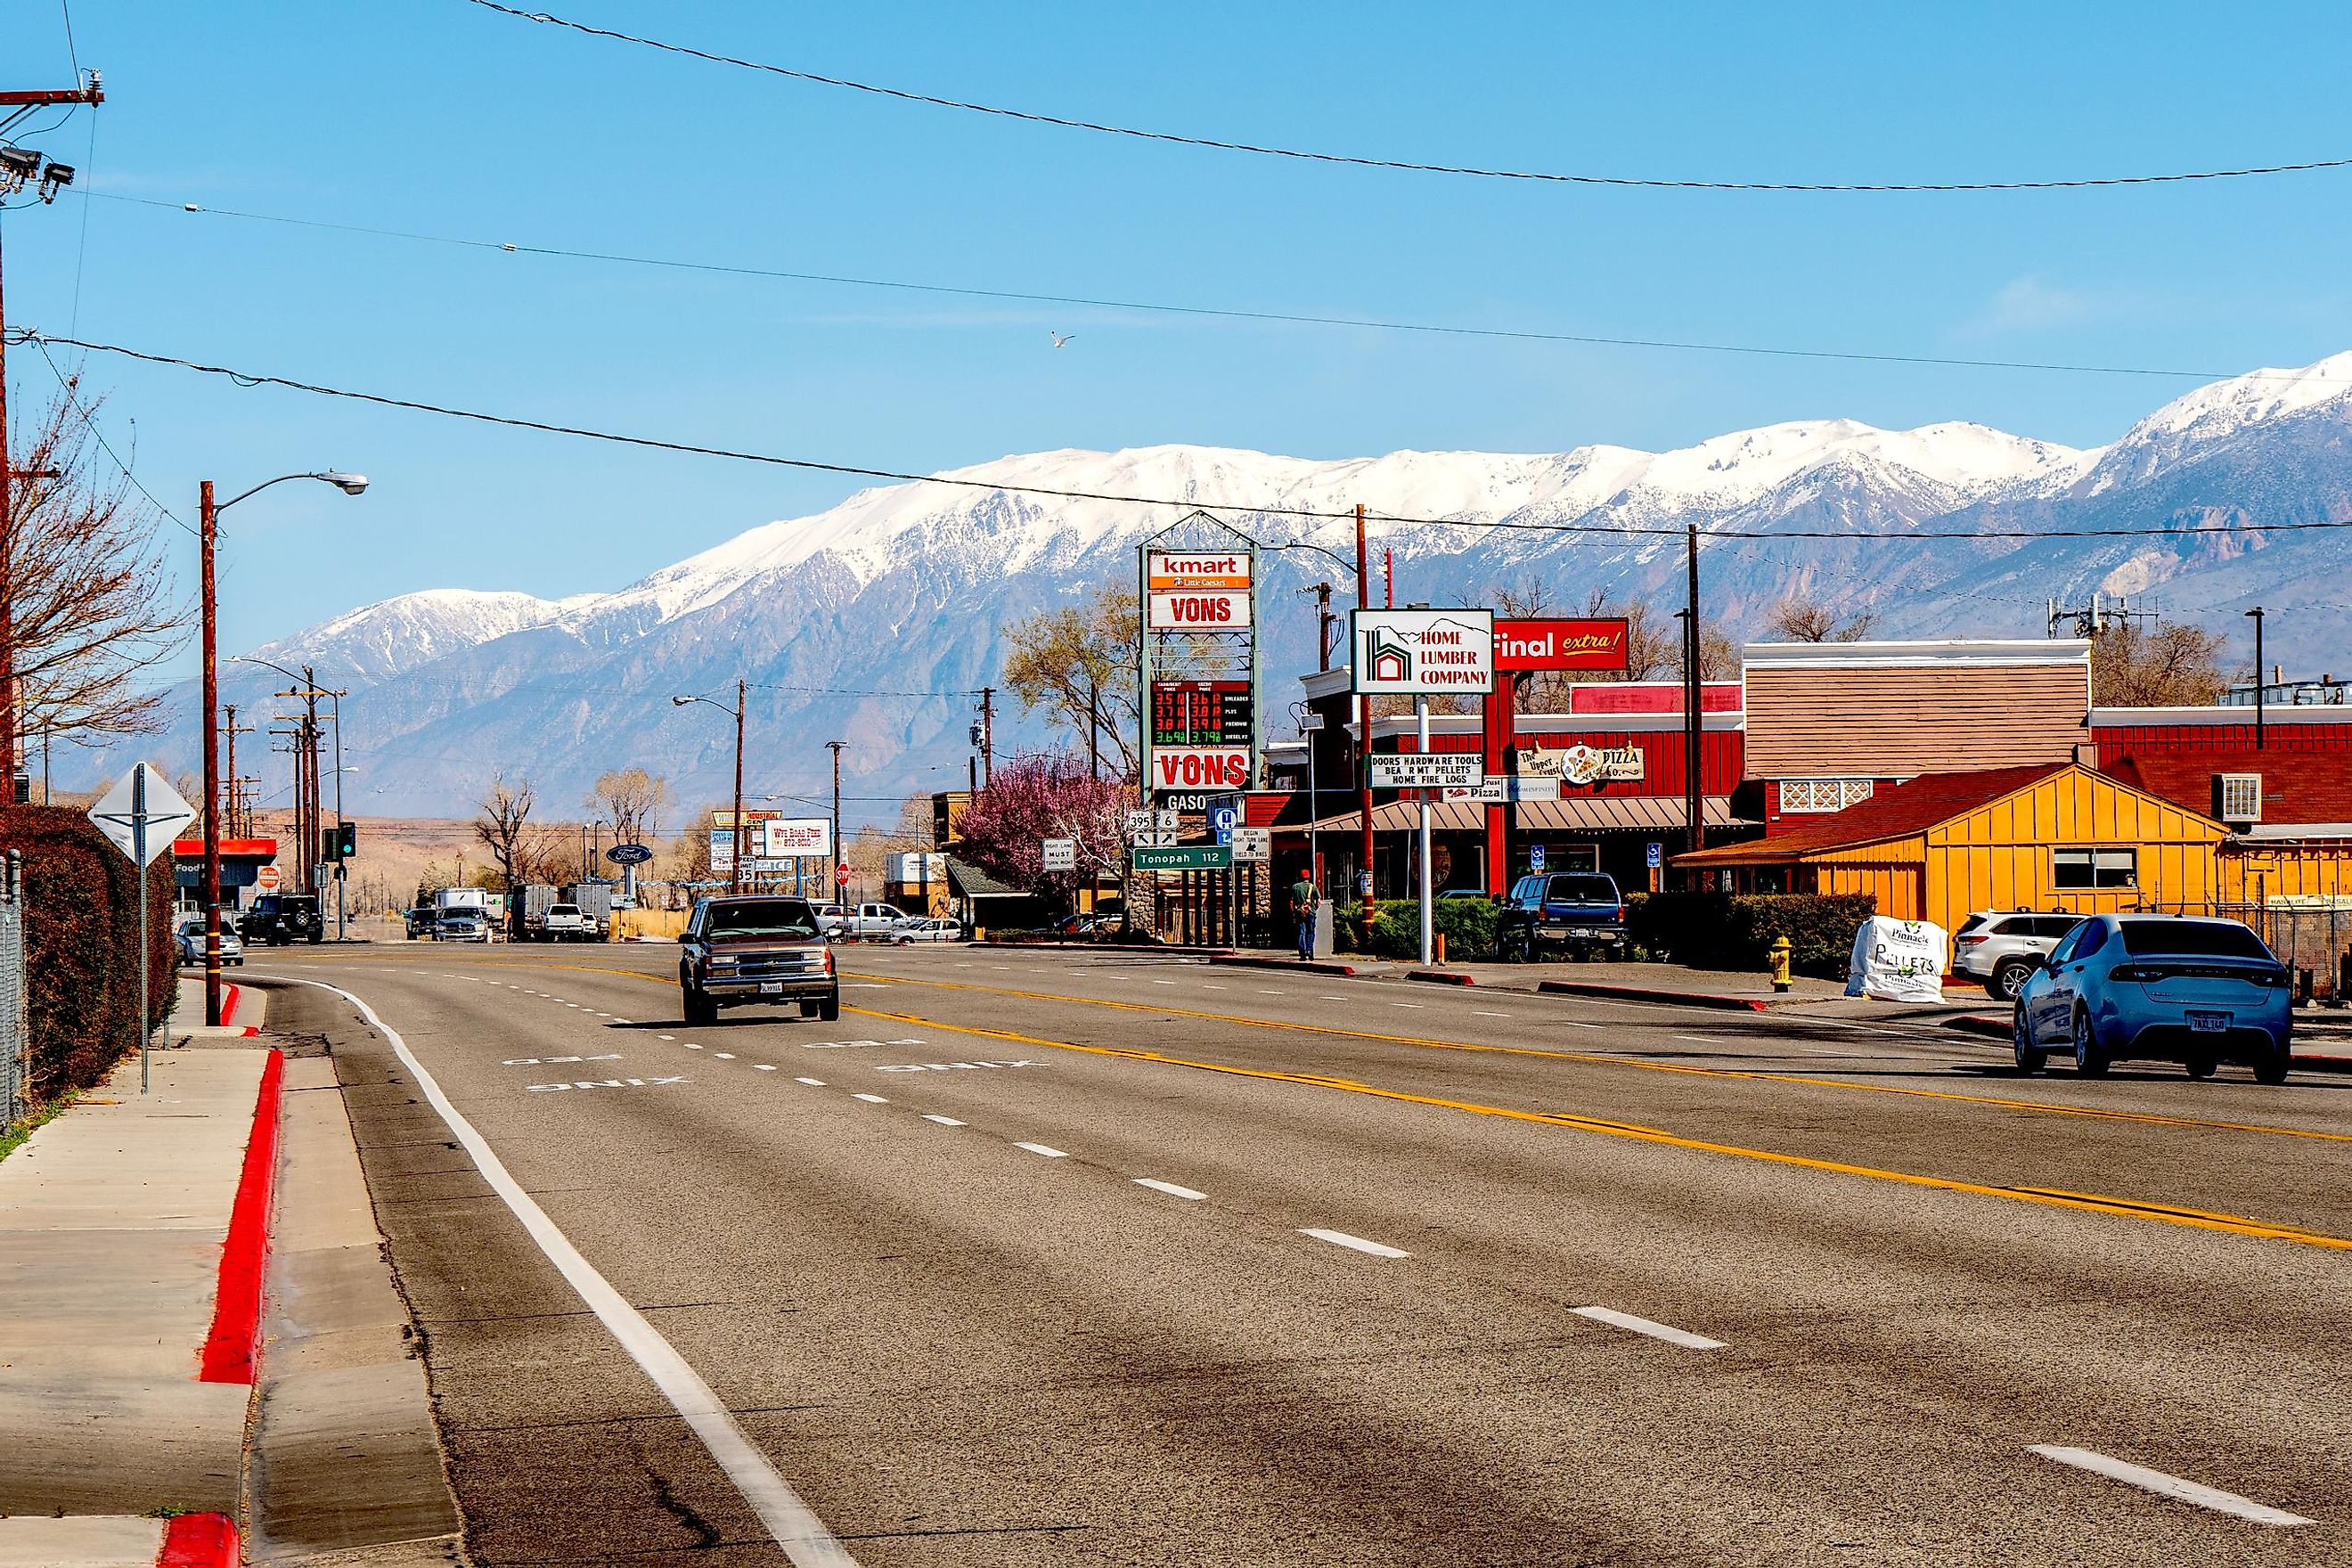 The gorgeous town of Bishop, California. Editorial credit: 4kclips / Shutterstock.com